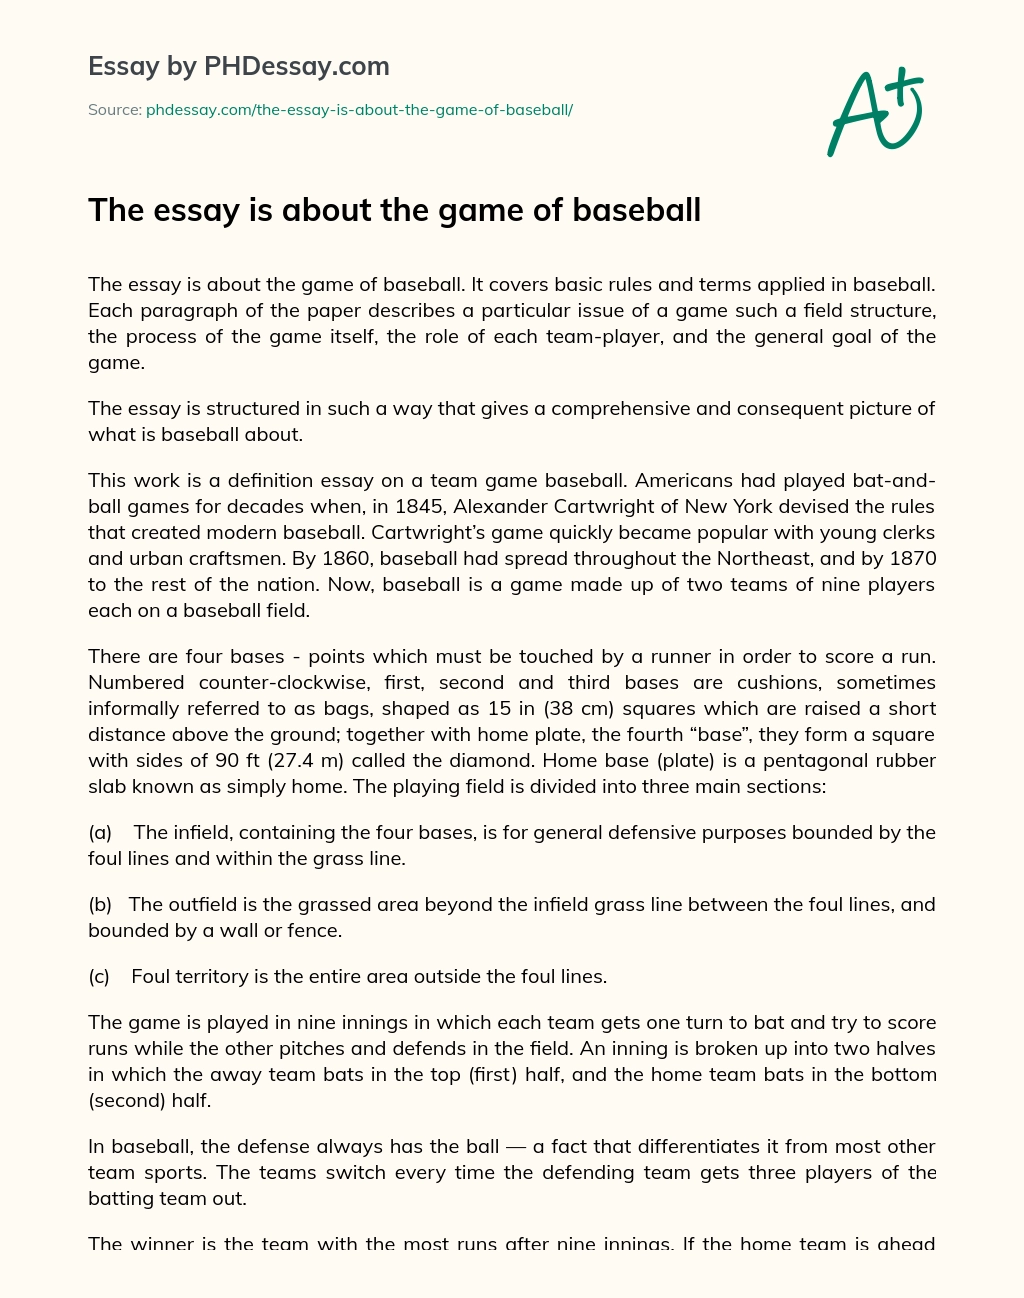 The essay is about the game of baseball essay